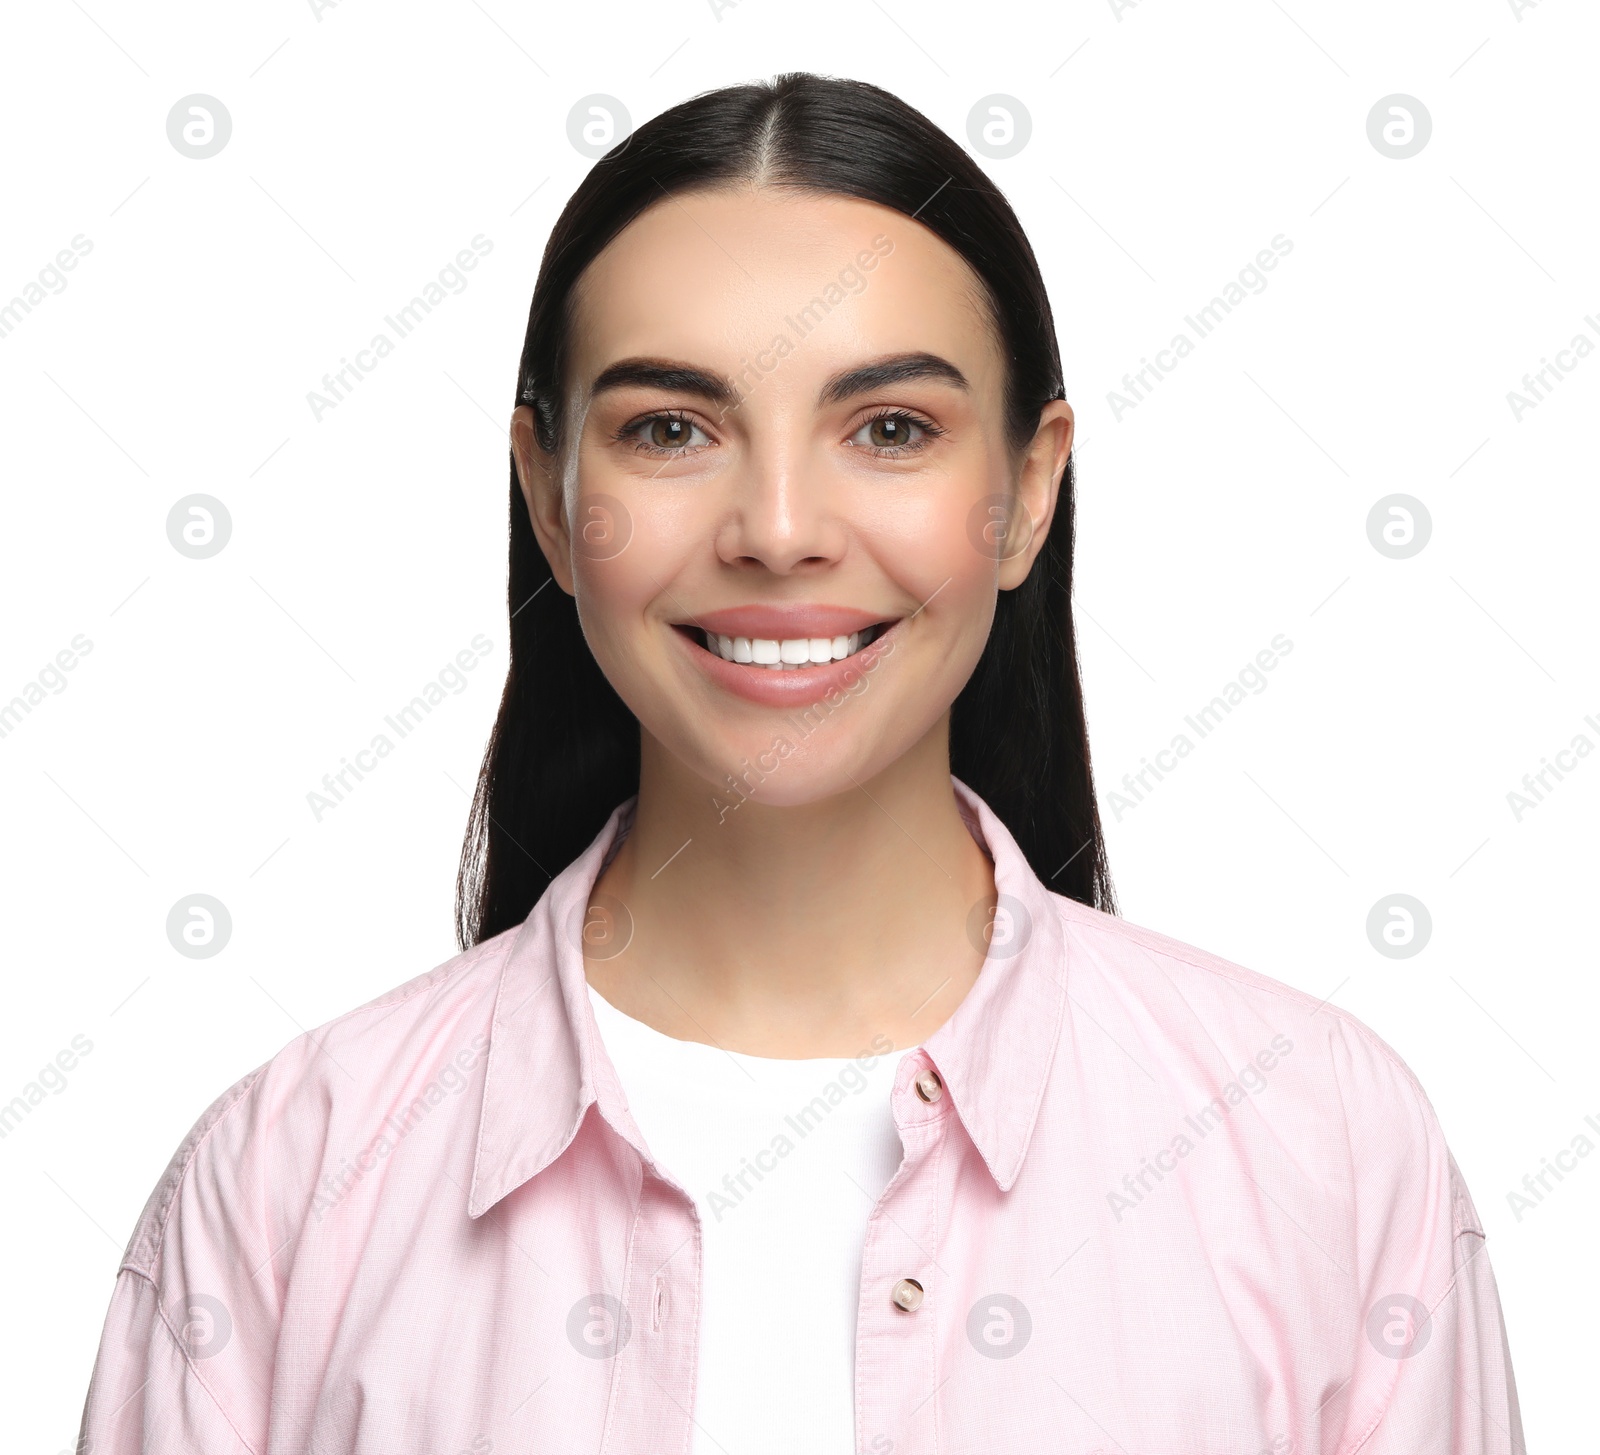 Photo of Beautiful woman with clean teeth smiling on white background